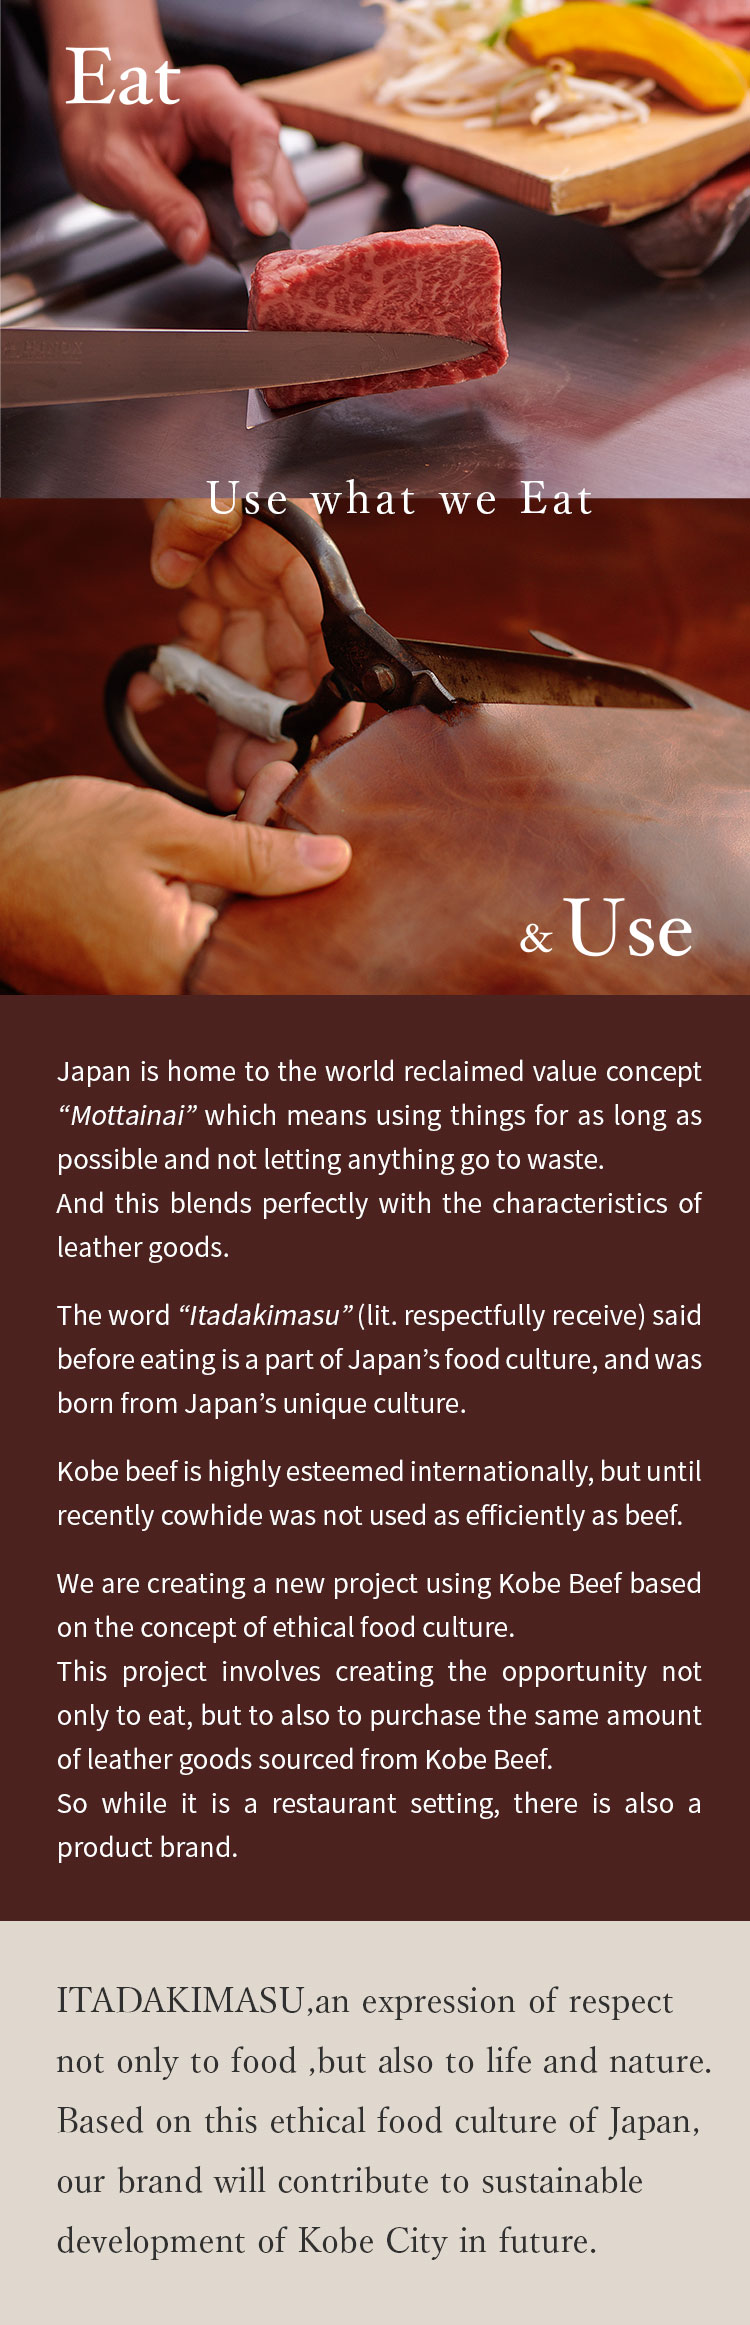 Use what we Eat 
Japan is home to the world reclaimed value concept “Mottainai” which means using things for as long as possible and not letting anything go to waste. 
And this blends perfectly with the characteristics of leather goods. 

The word “Itadakimasu” (lit. respectfully receive) said before eating is a part of Japan’s food culture, and was born from Japan’s unique culture.

Kobe beef is highly esteemed internationally, but until recently cowhide was not used as efficiently as beef.

We are creating a new project using Kobe Beef based on the concept of ethical food culture.
This project involves creating the opportunity not only to eat, but to also to purchase the same amount of leather goods sourced from Kobe Beef. 
So while it is a restaurant setting, there is also a product brand.

ITADAKIMASU,an expression of respect not only to food ,but also to life and nature.
Based on this ethical food culture of Japan,our brand will contribute to sustainable development of Kobe City in future.